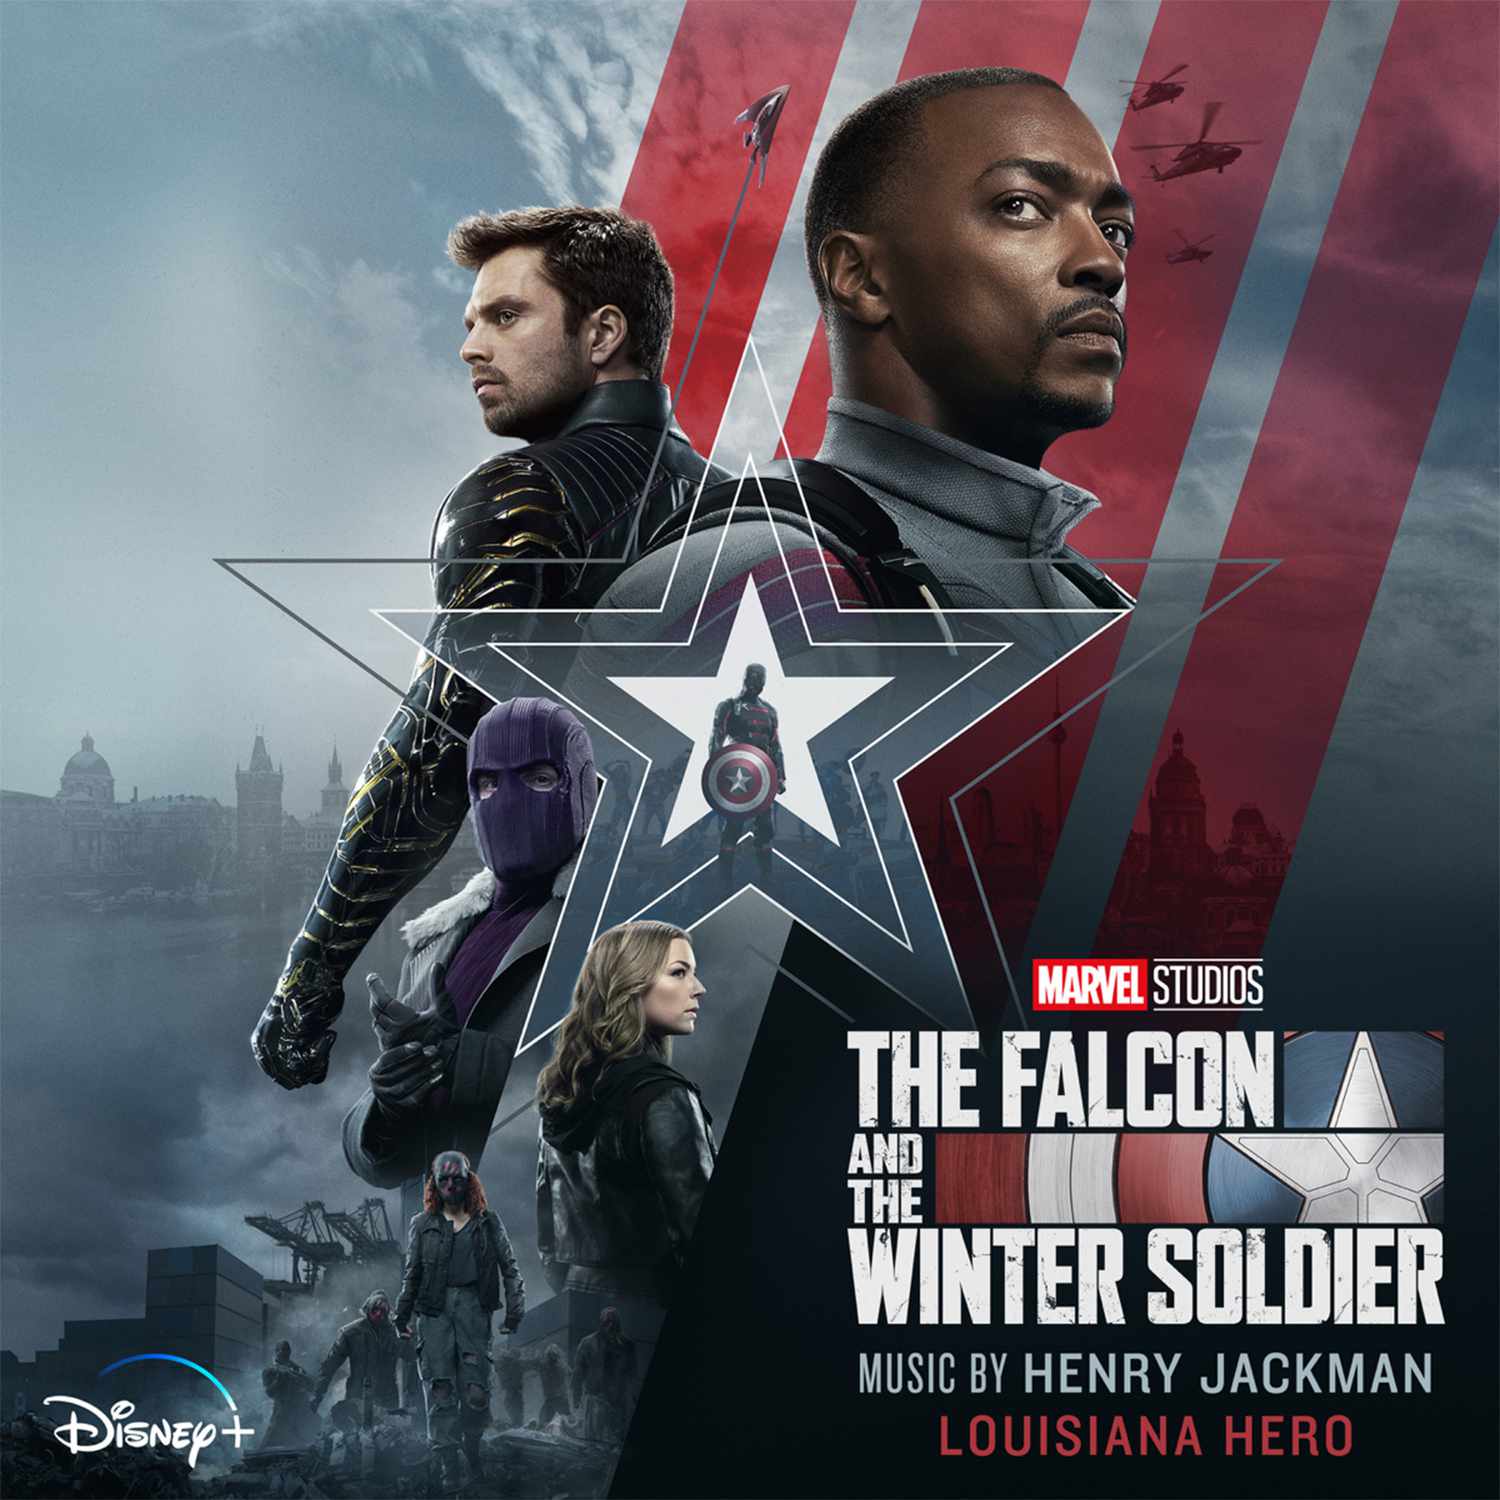 Louisiana Hero from The Falcon and the Winter Soldier, Henry Jackman